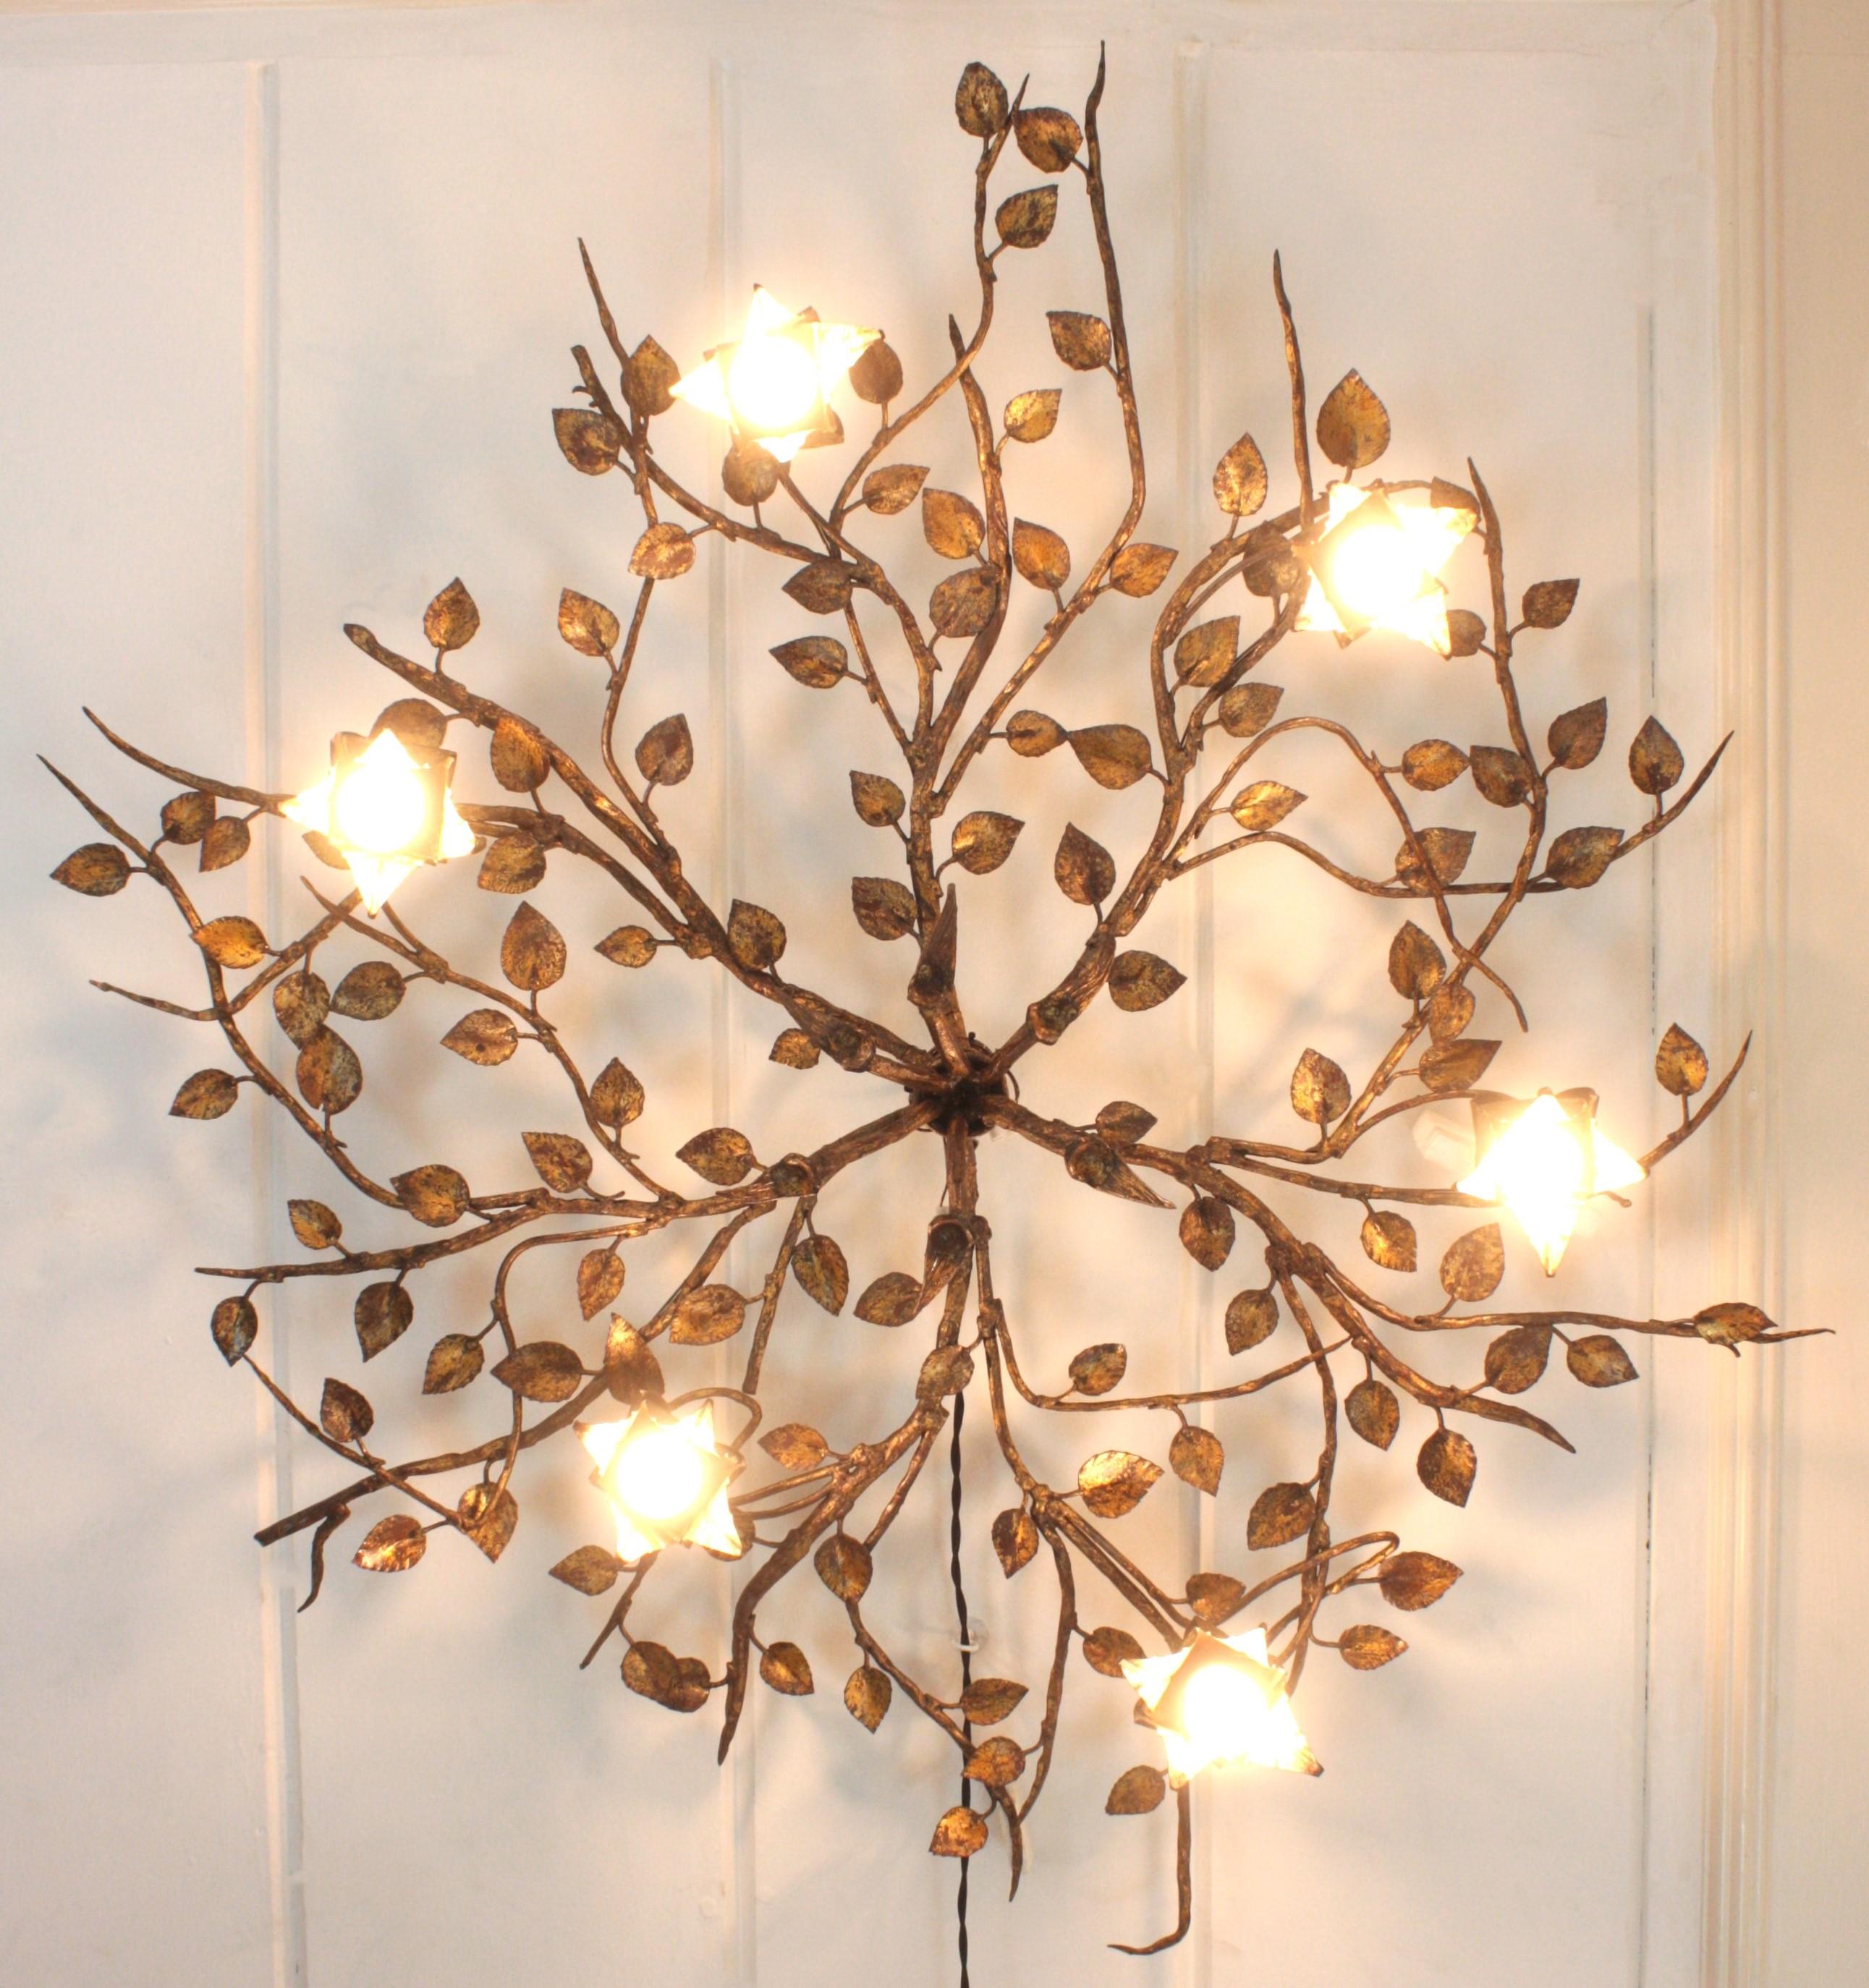 Oustanding  Rosebush Tree Ceiling Flush Mount, Hand Forged Gilt Iron, Spain, 1940s. 
Monumental large size ( 47,24 in ) hand-hammered gilt iron foliage flower bush ceiling light fixture with six flower lights.
This ceiling light fixture was entirely